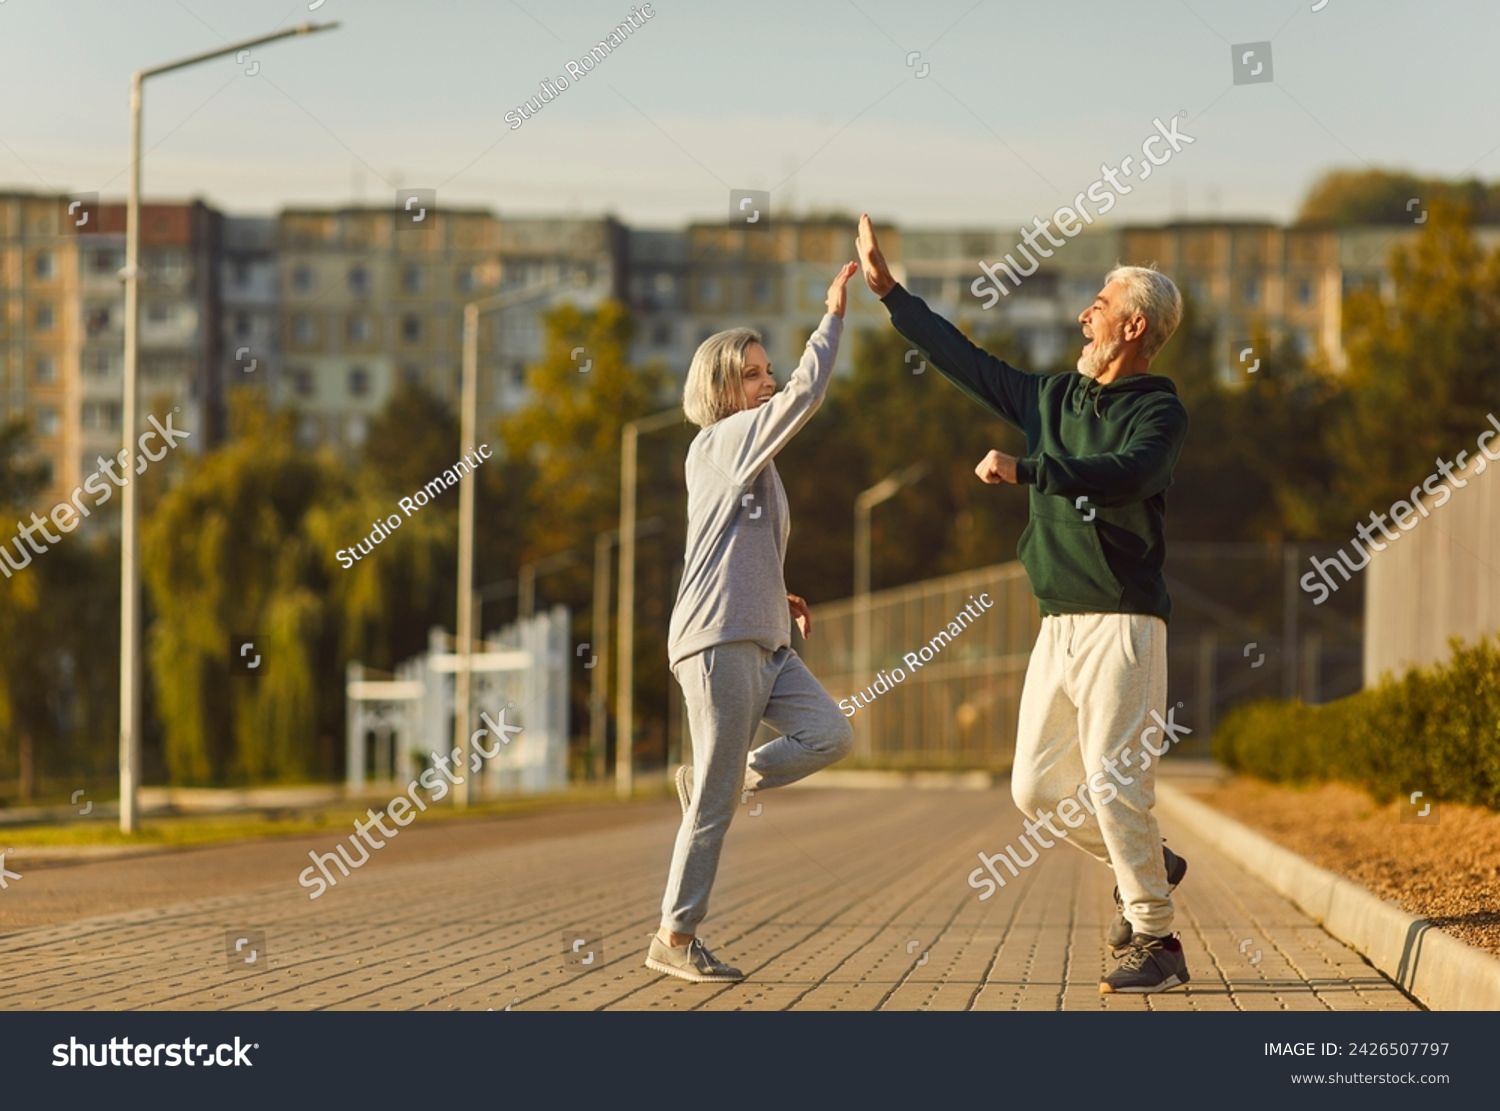 Active senior happy pair running high five, sporty physically energetic older man, woman outdoor jogging. Elderly people street physical exercise, enjoy open air activity to boost mood, energy level #2426507797